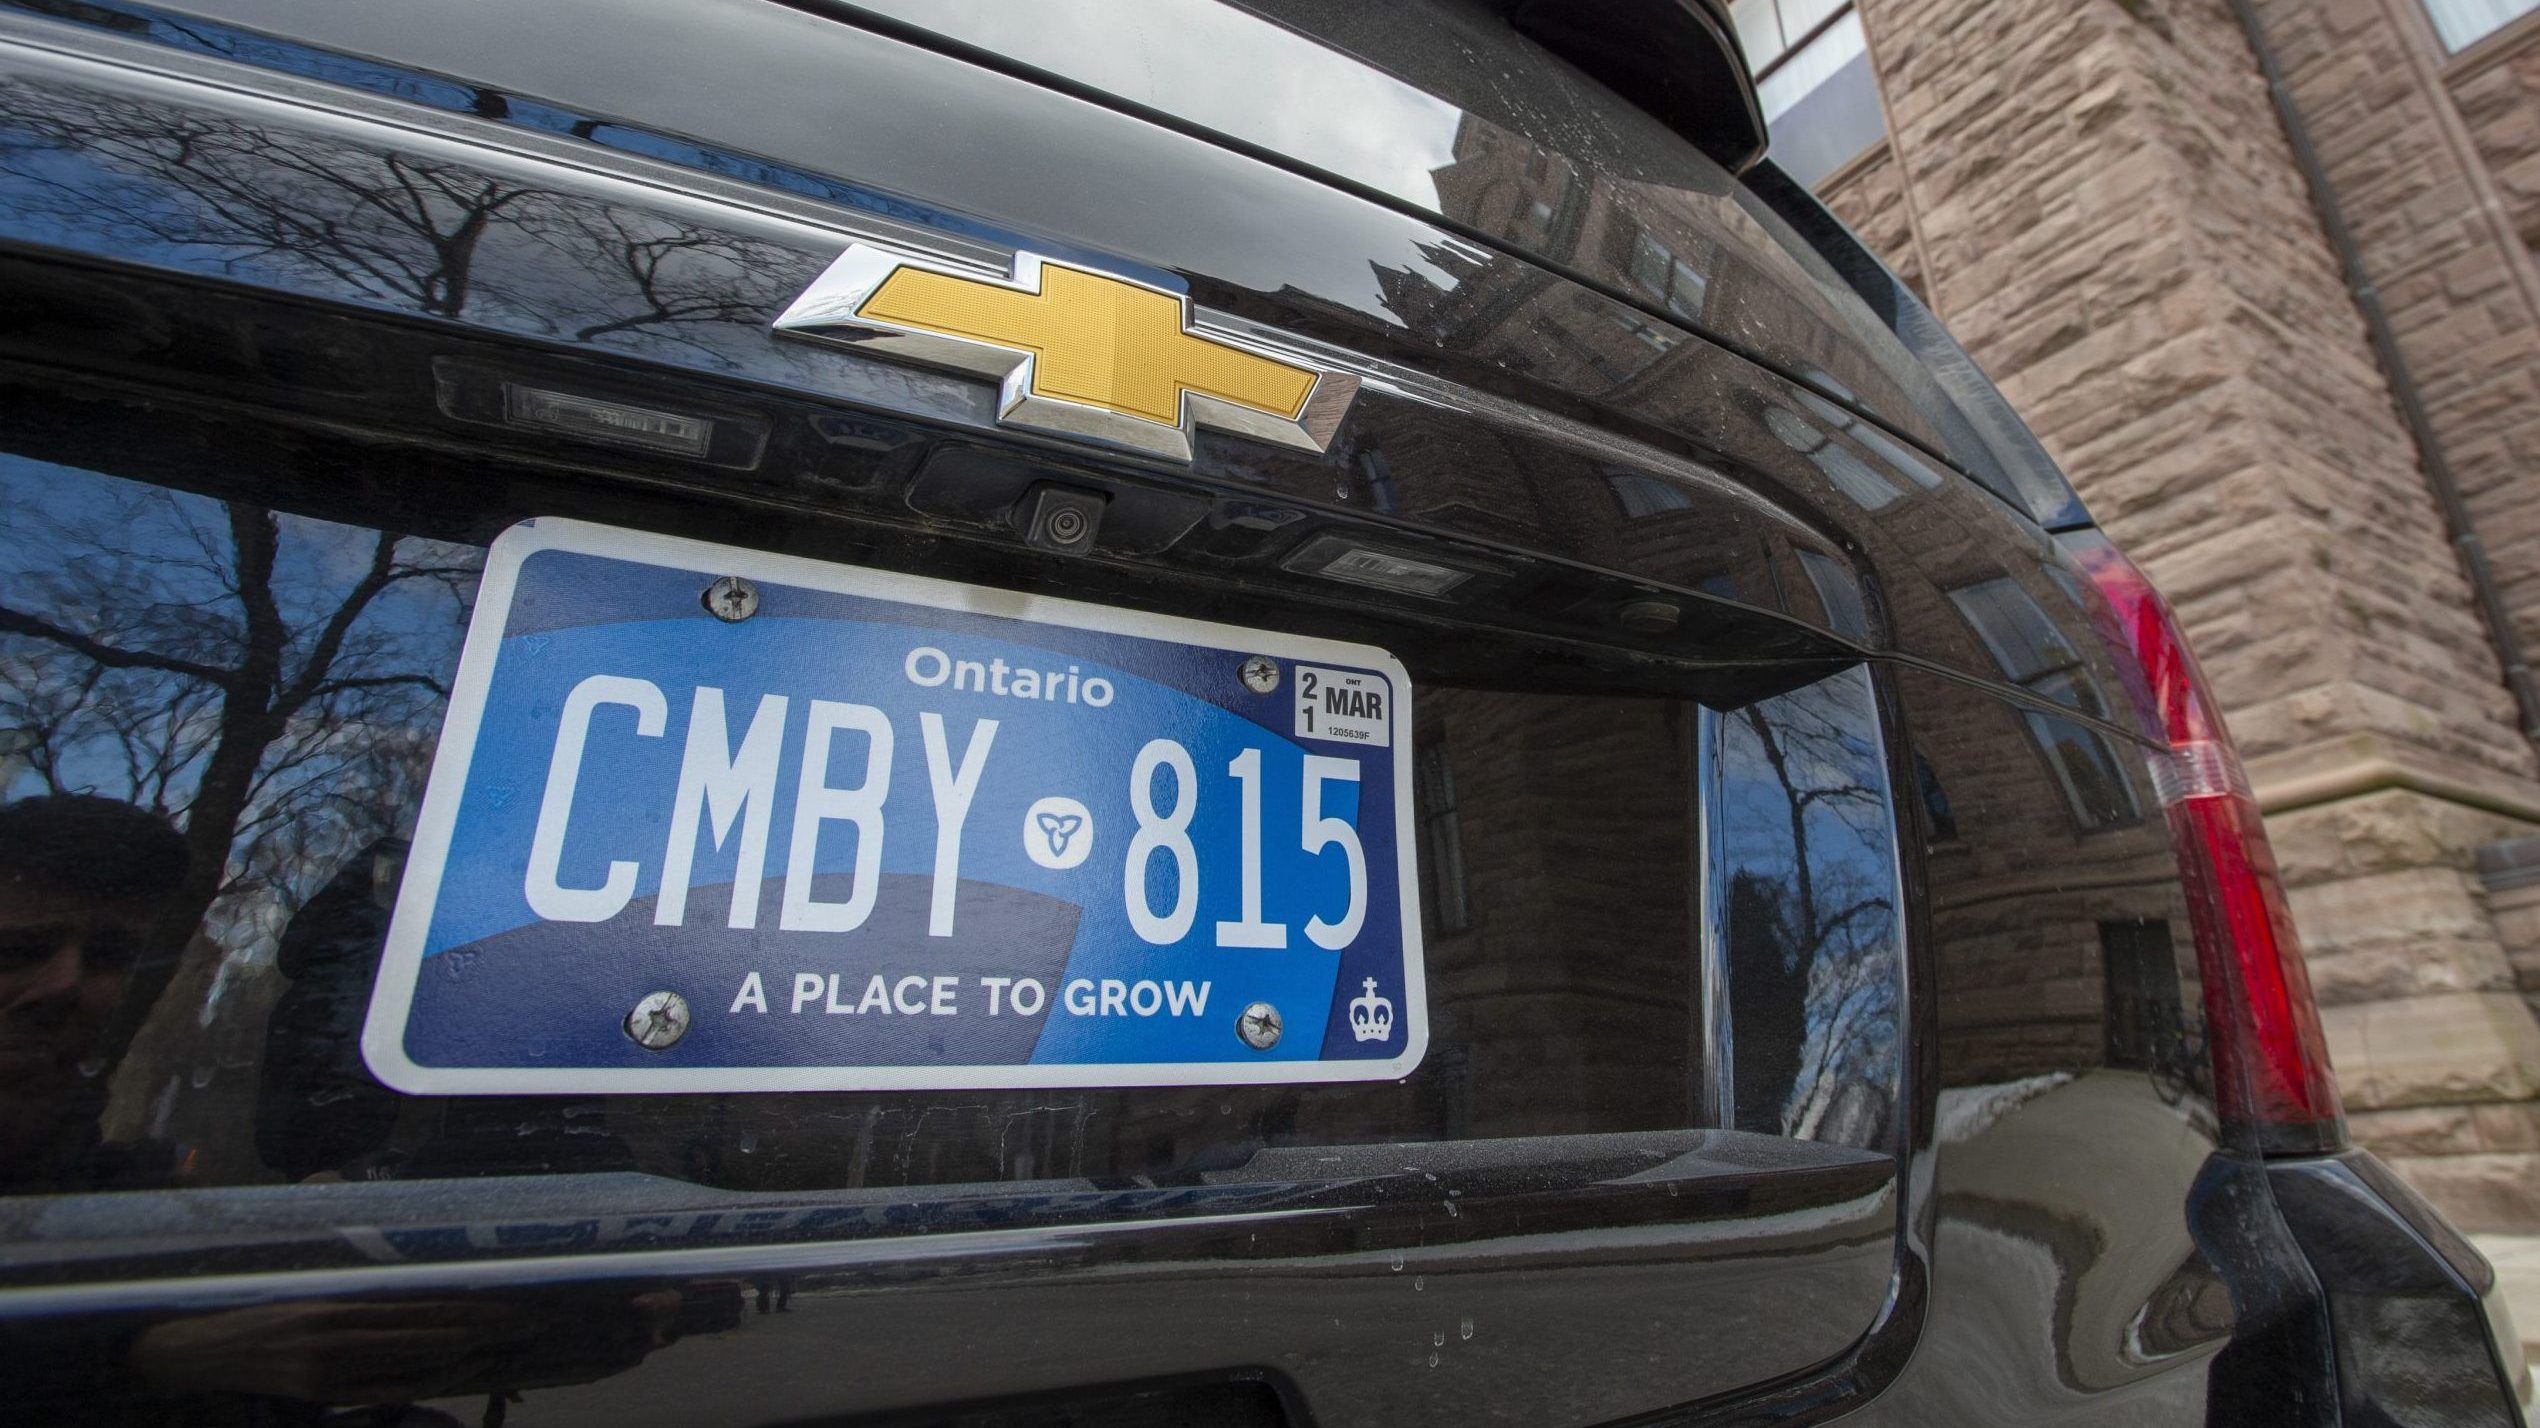 License plate renewal in Ontario: Everything you need to know